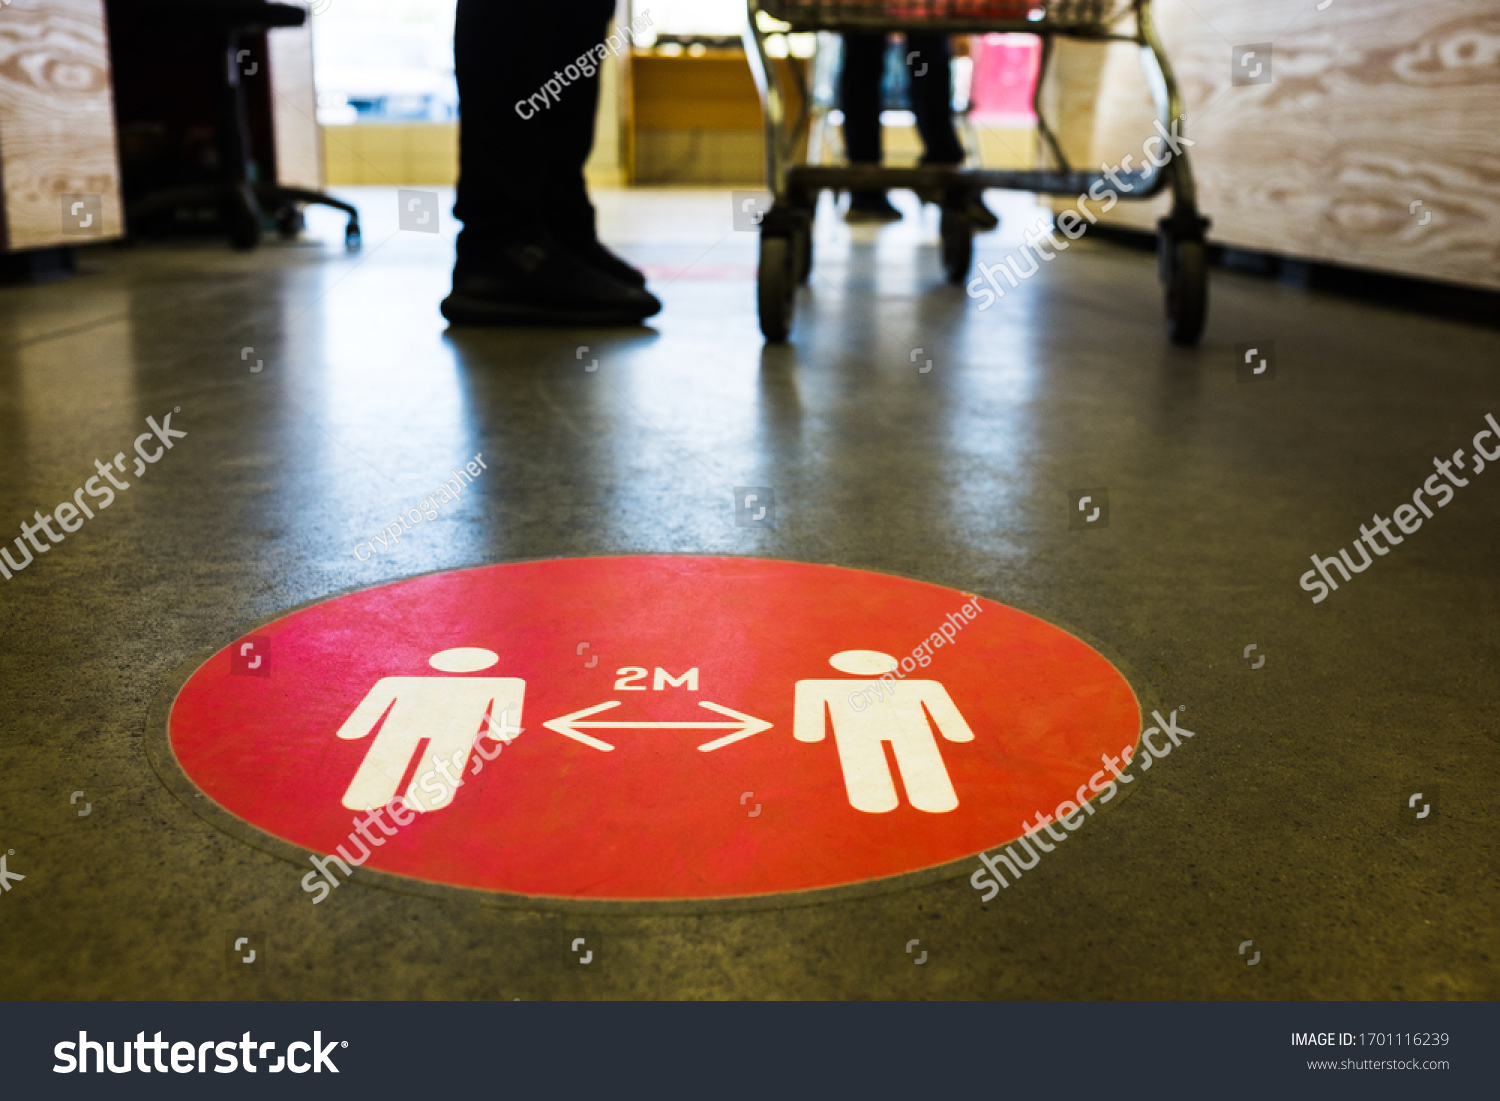 Red round sign printed on ground at supermarket cash desk register informing people to keep 2 meter 6 feet distance from each other,prevent spreading Coronavirus COVID-19 virus disease infection,UK&US